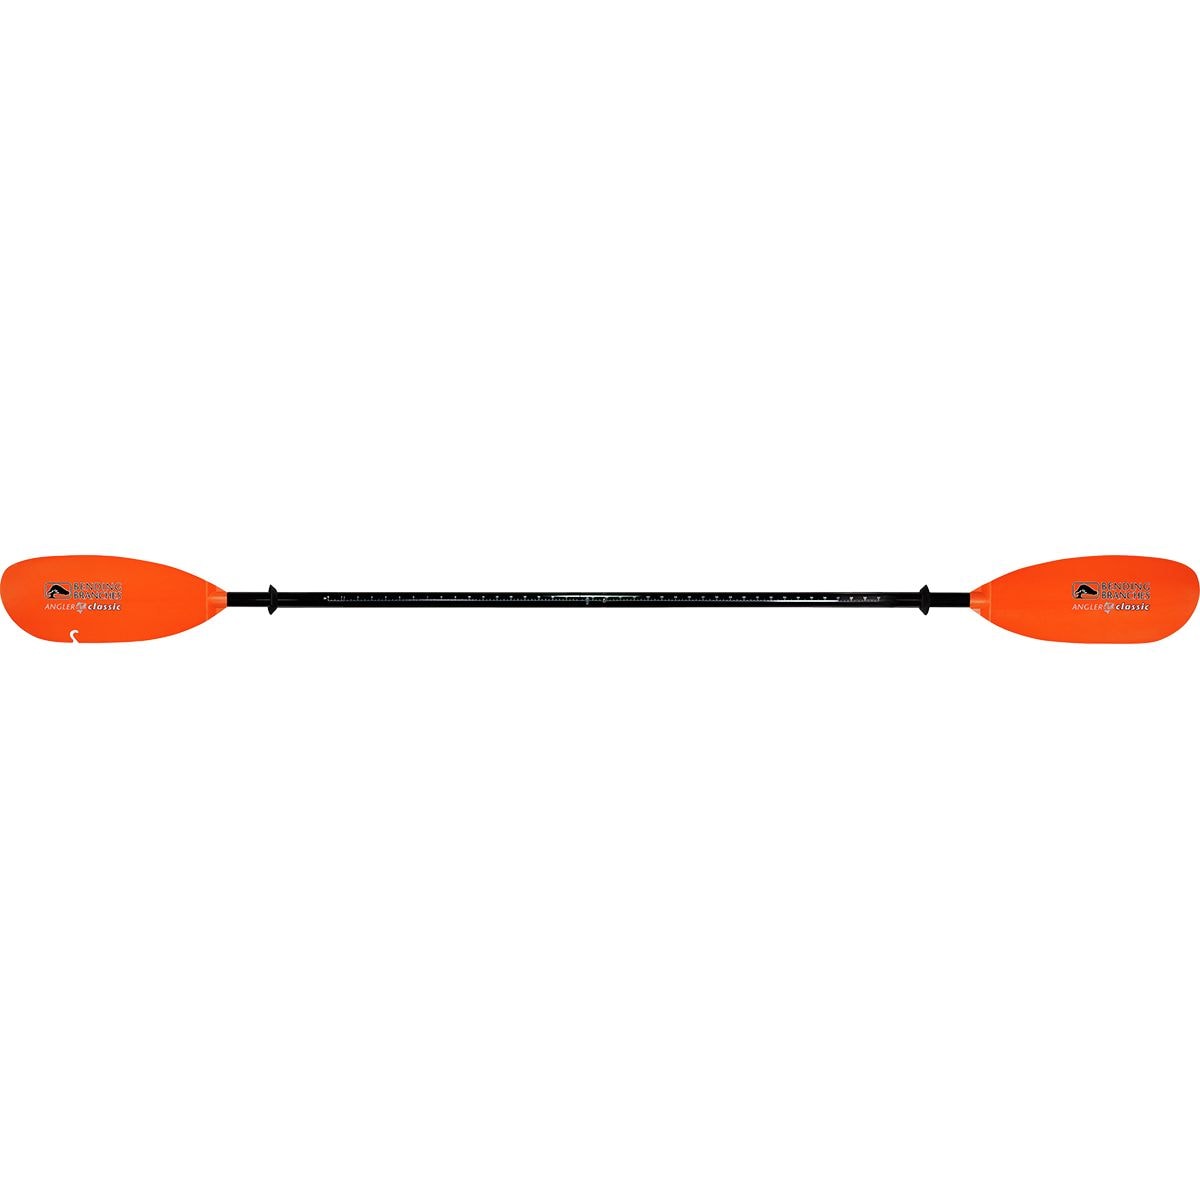 Bending Branches Angler Classic Plus Paddle- 2-Piece Plus Ferrule